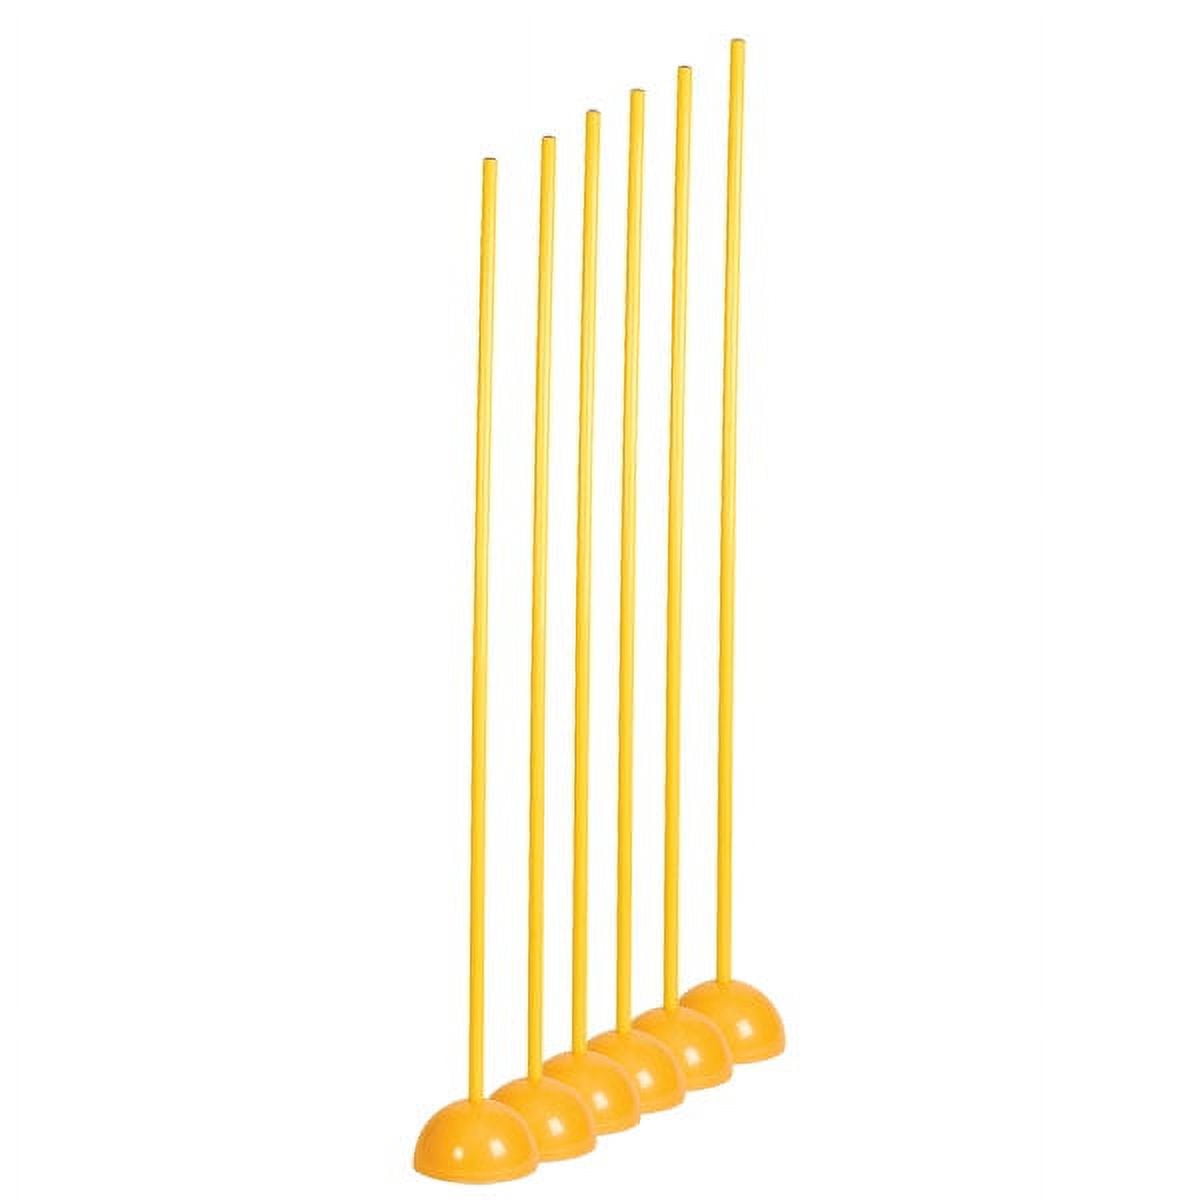 Picture of Champion Sports CK60 Coaching Sticks with Bases, Yellow - Set of 6